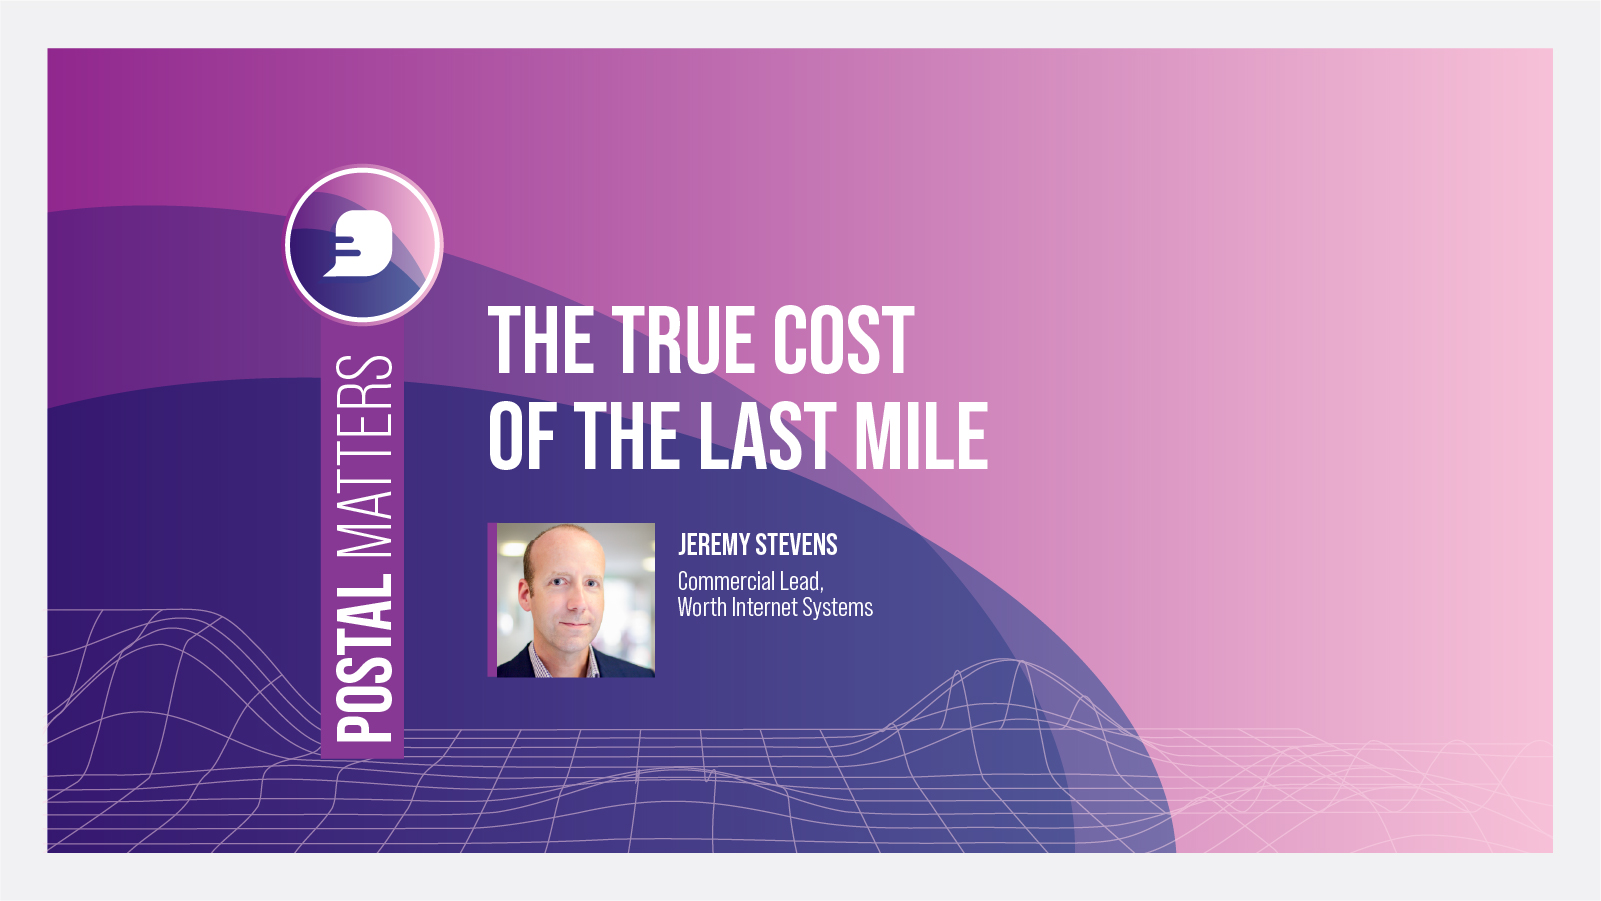 The true cost of the last mile